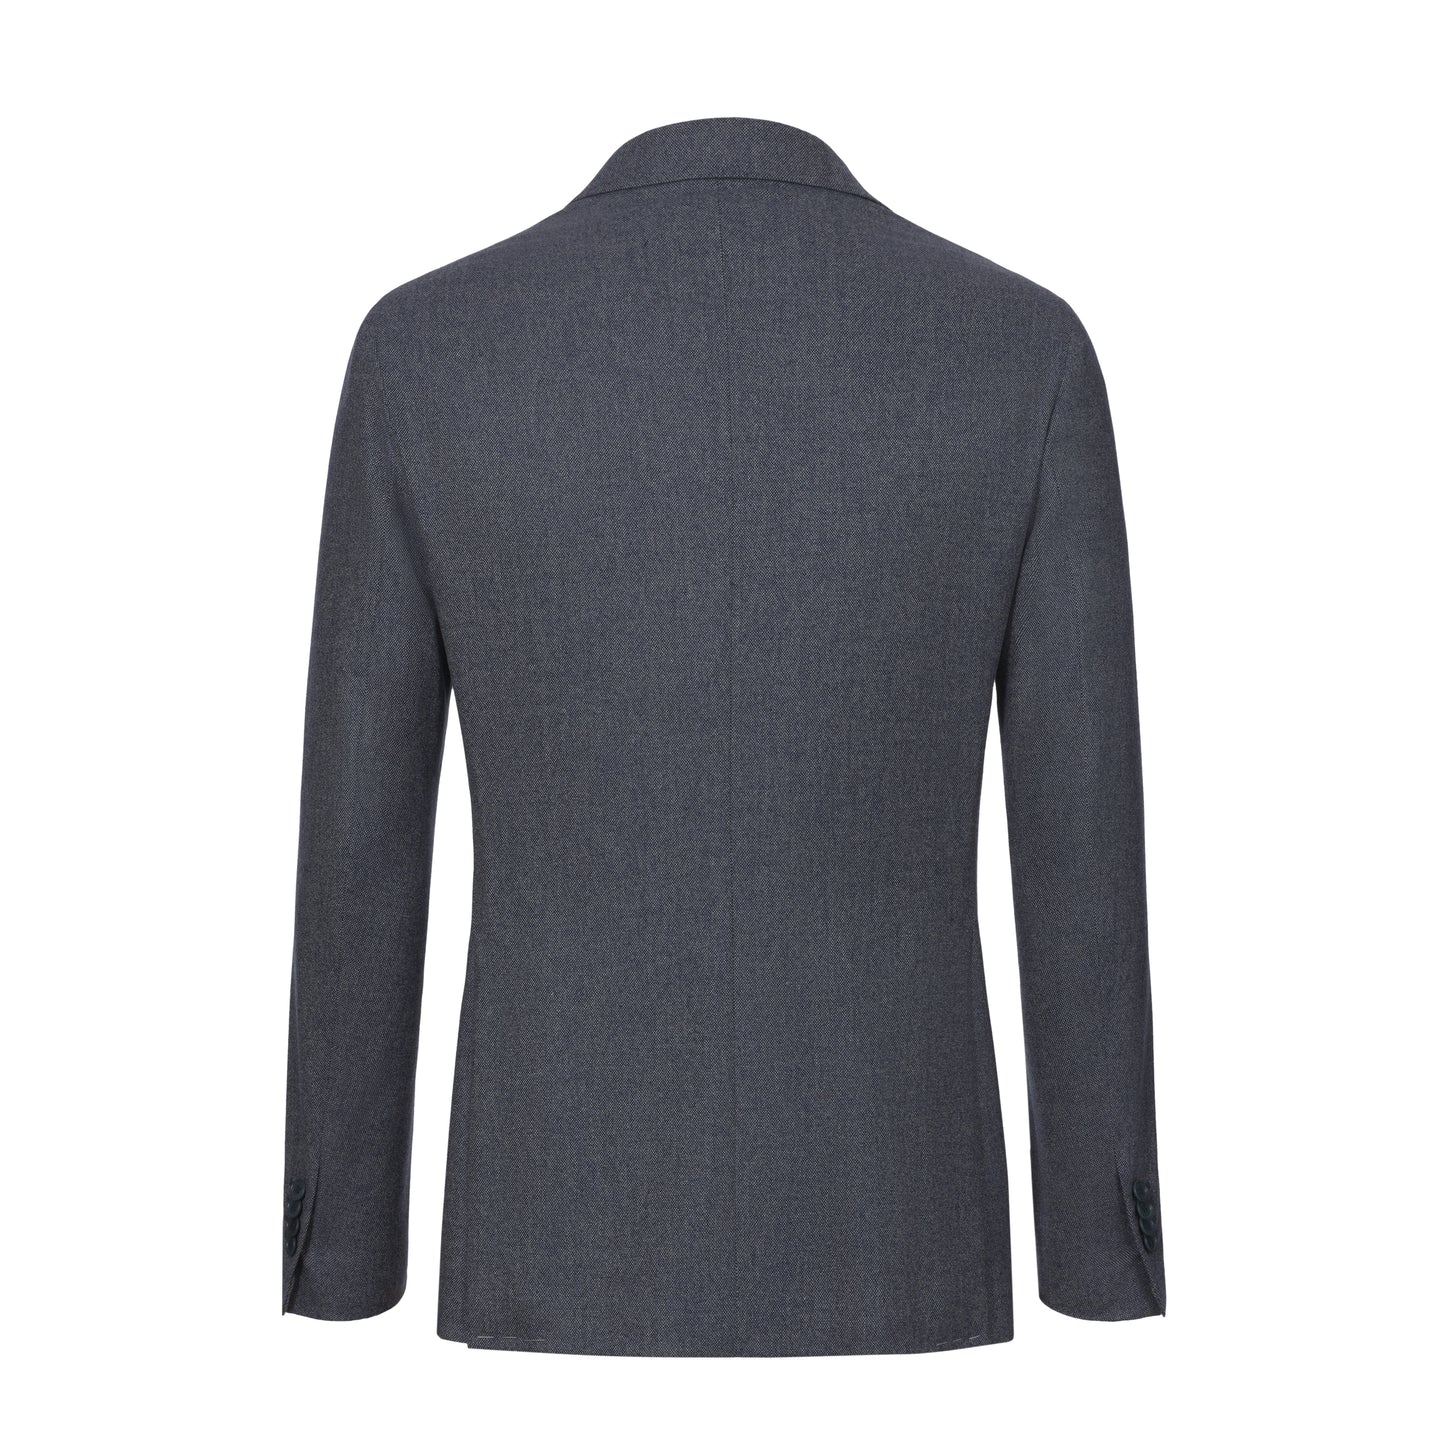 Single-Breasted Cashmere Jacket in Blue Melange. Exclusively Made for Sartale